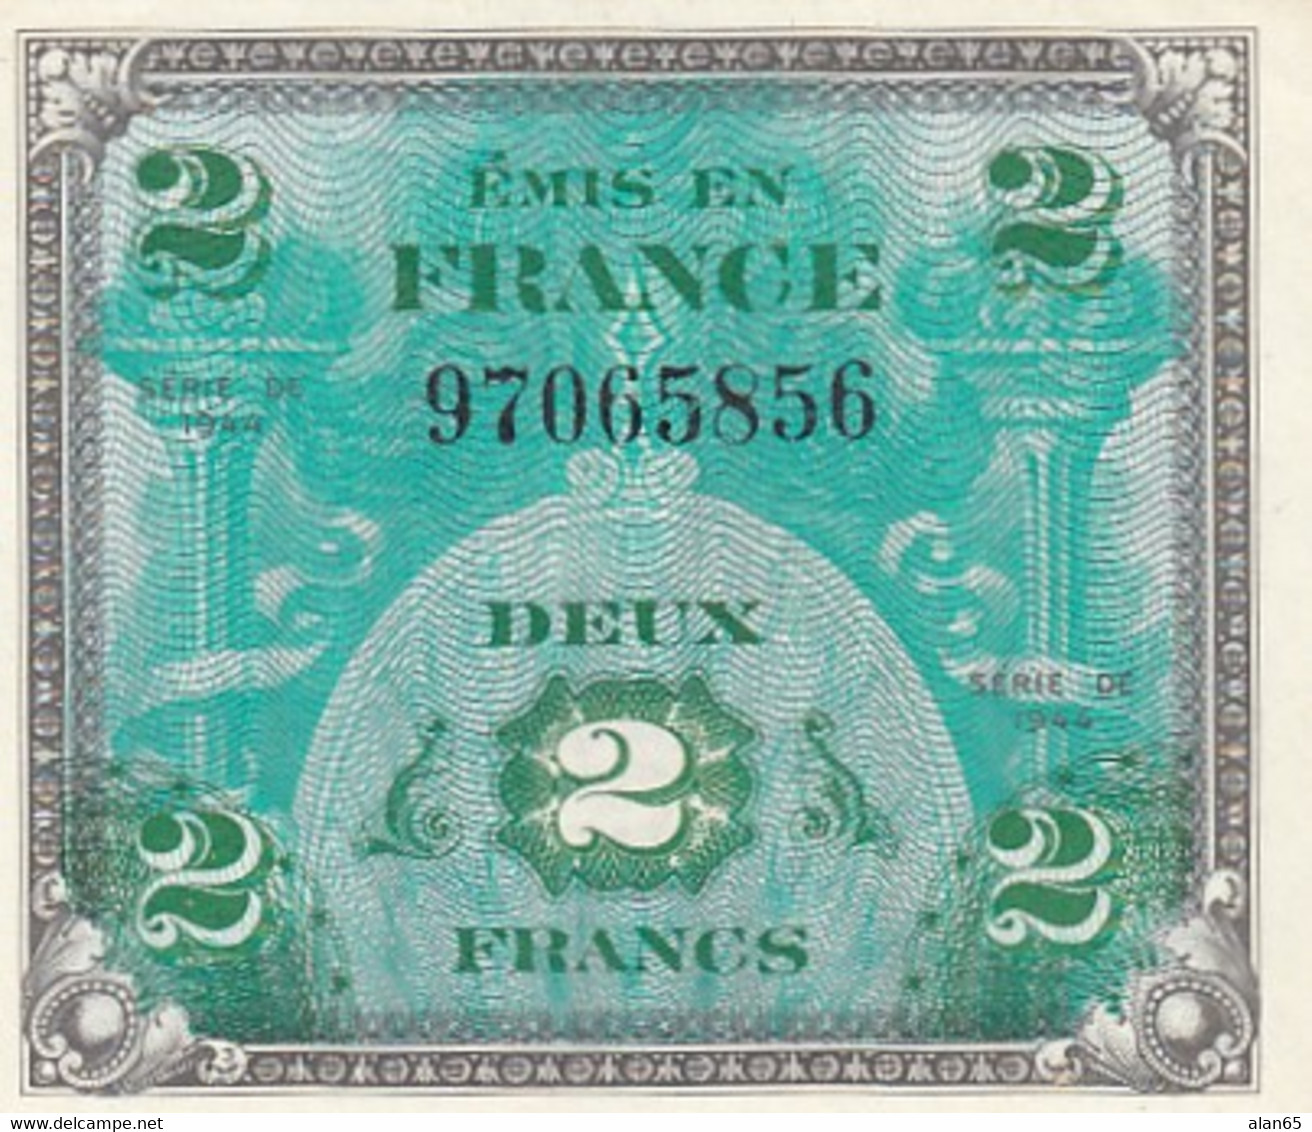 France #114a 2 Francs 1944  Banknote, Allied Military Currency - 1944 Drapeau/France